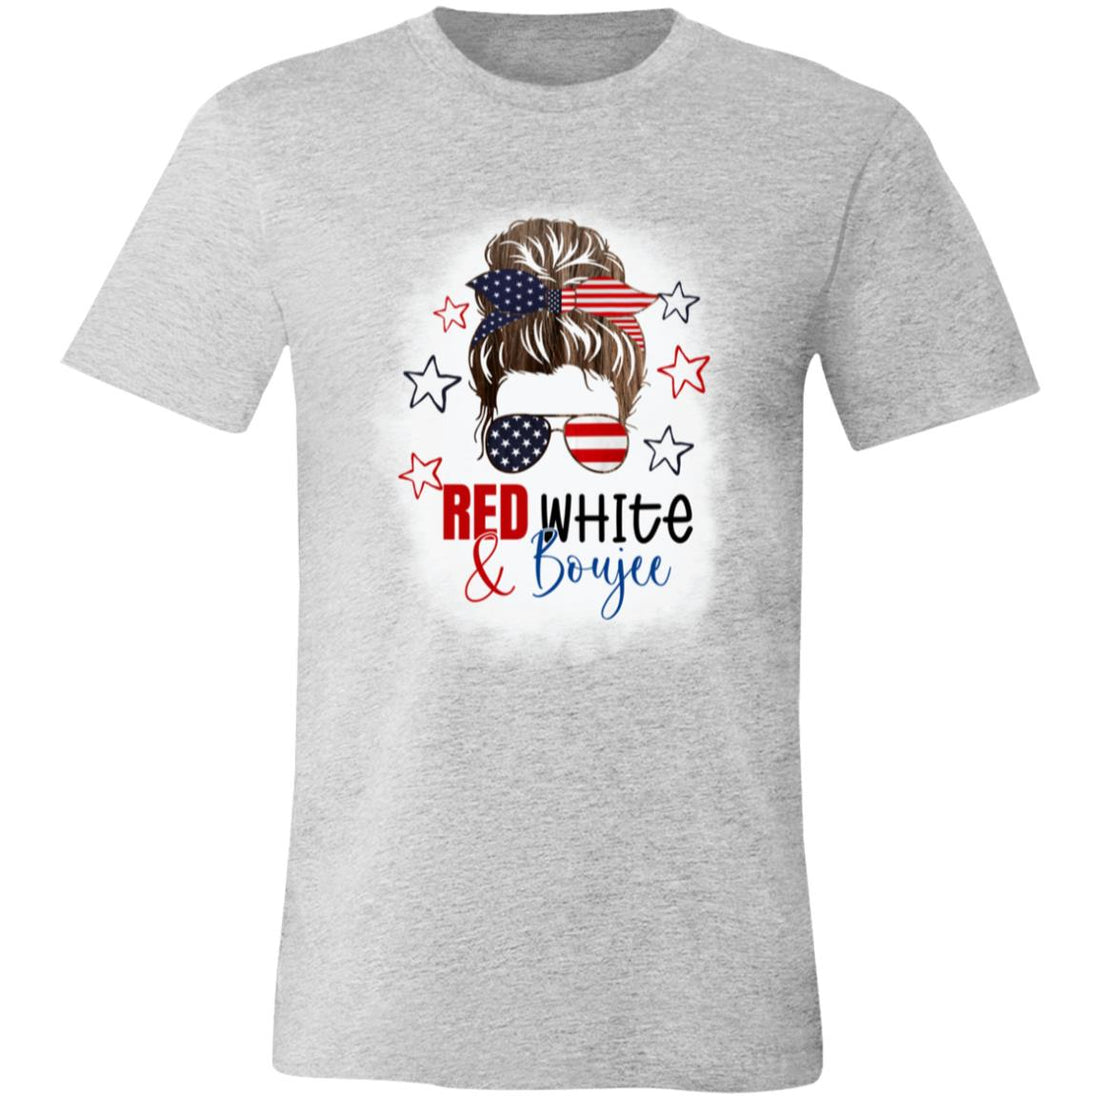 Red, White & BoujeeT-Shirt - T-Shirts - Positively Sassy - Red, White & BoujeeT-Shirt